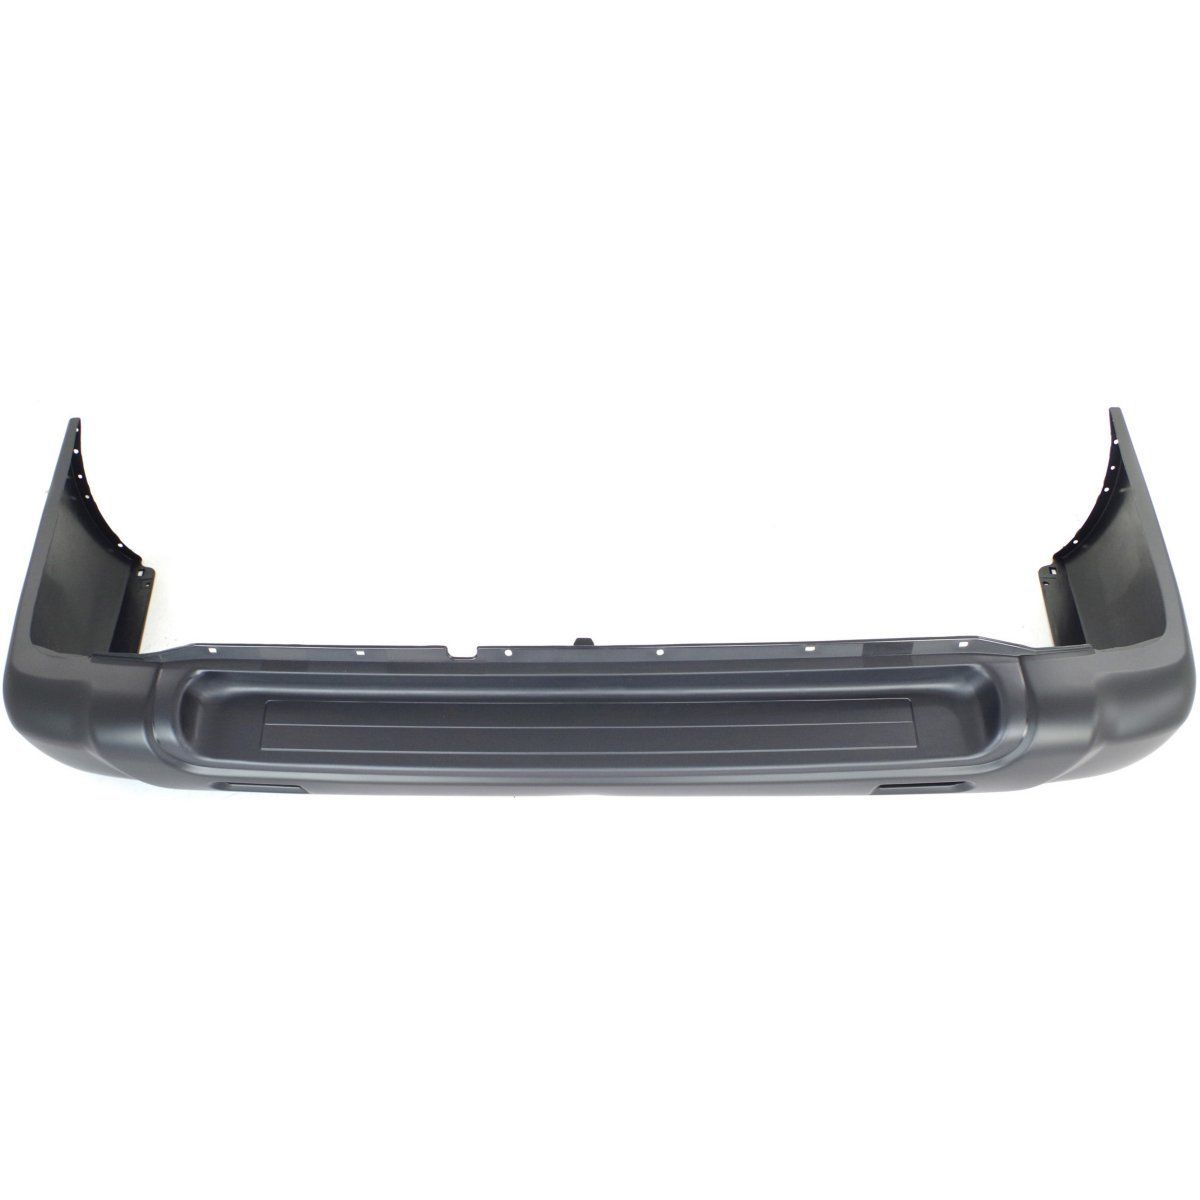 1999-2004 NISSAN PATHFINDER Rear Bumper Cover w/o spare tire carrier  from 12/98 Painted to Match